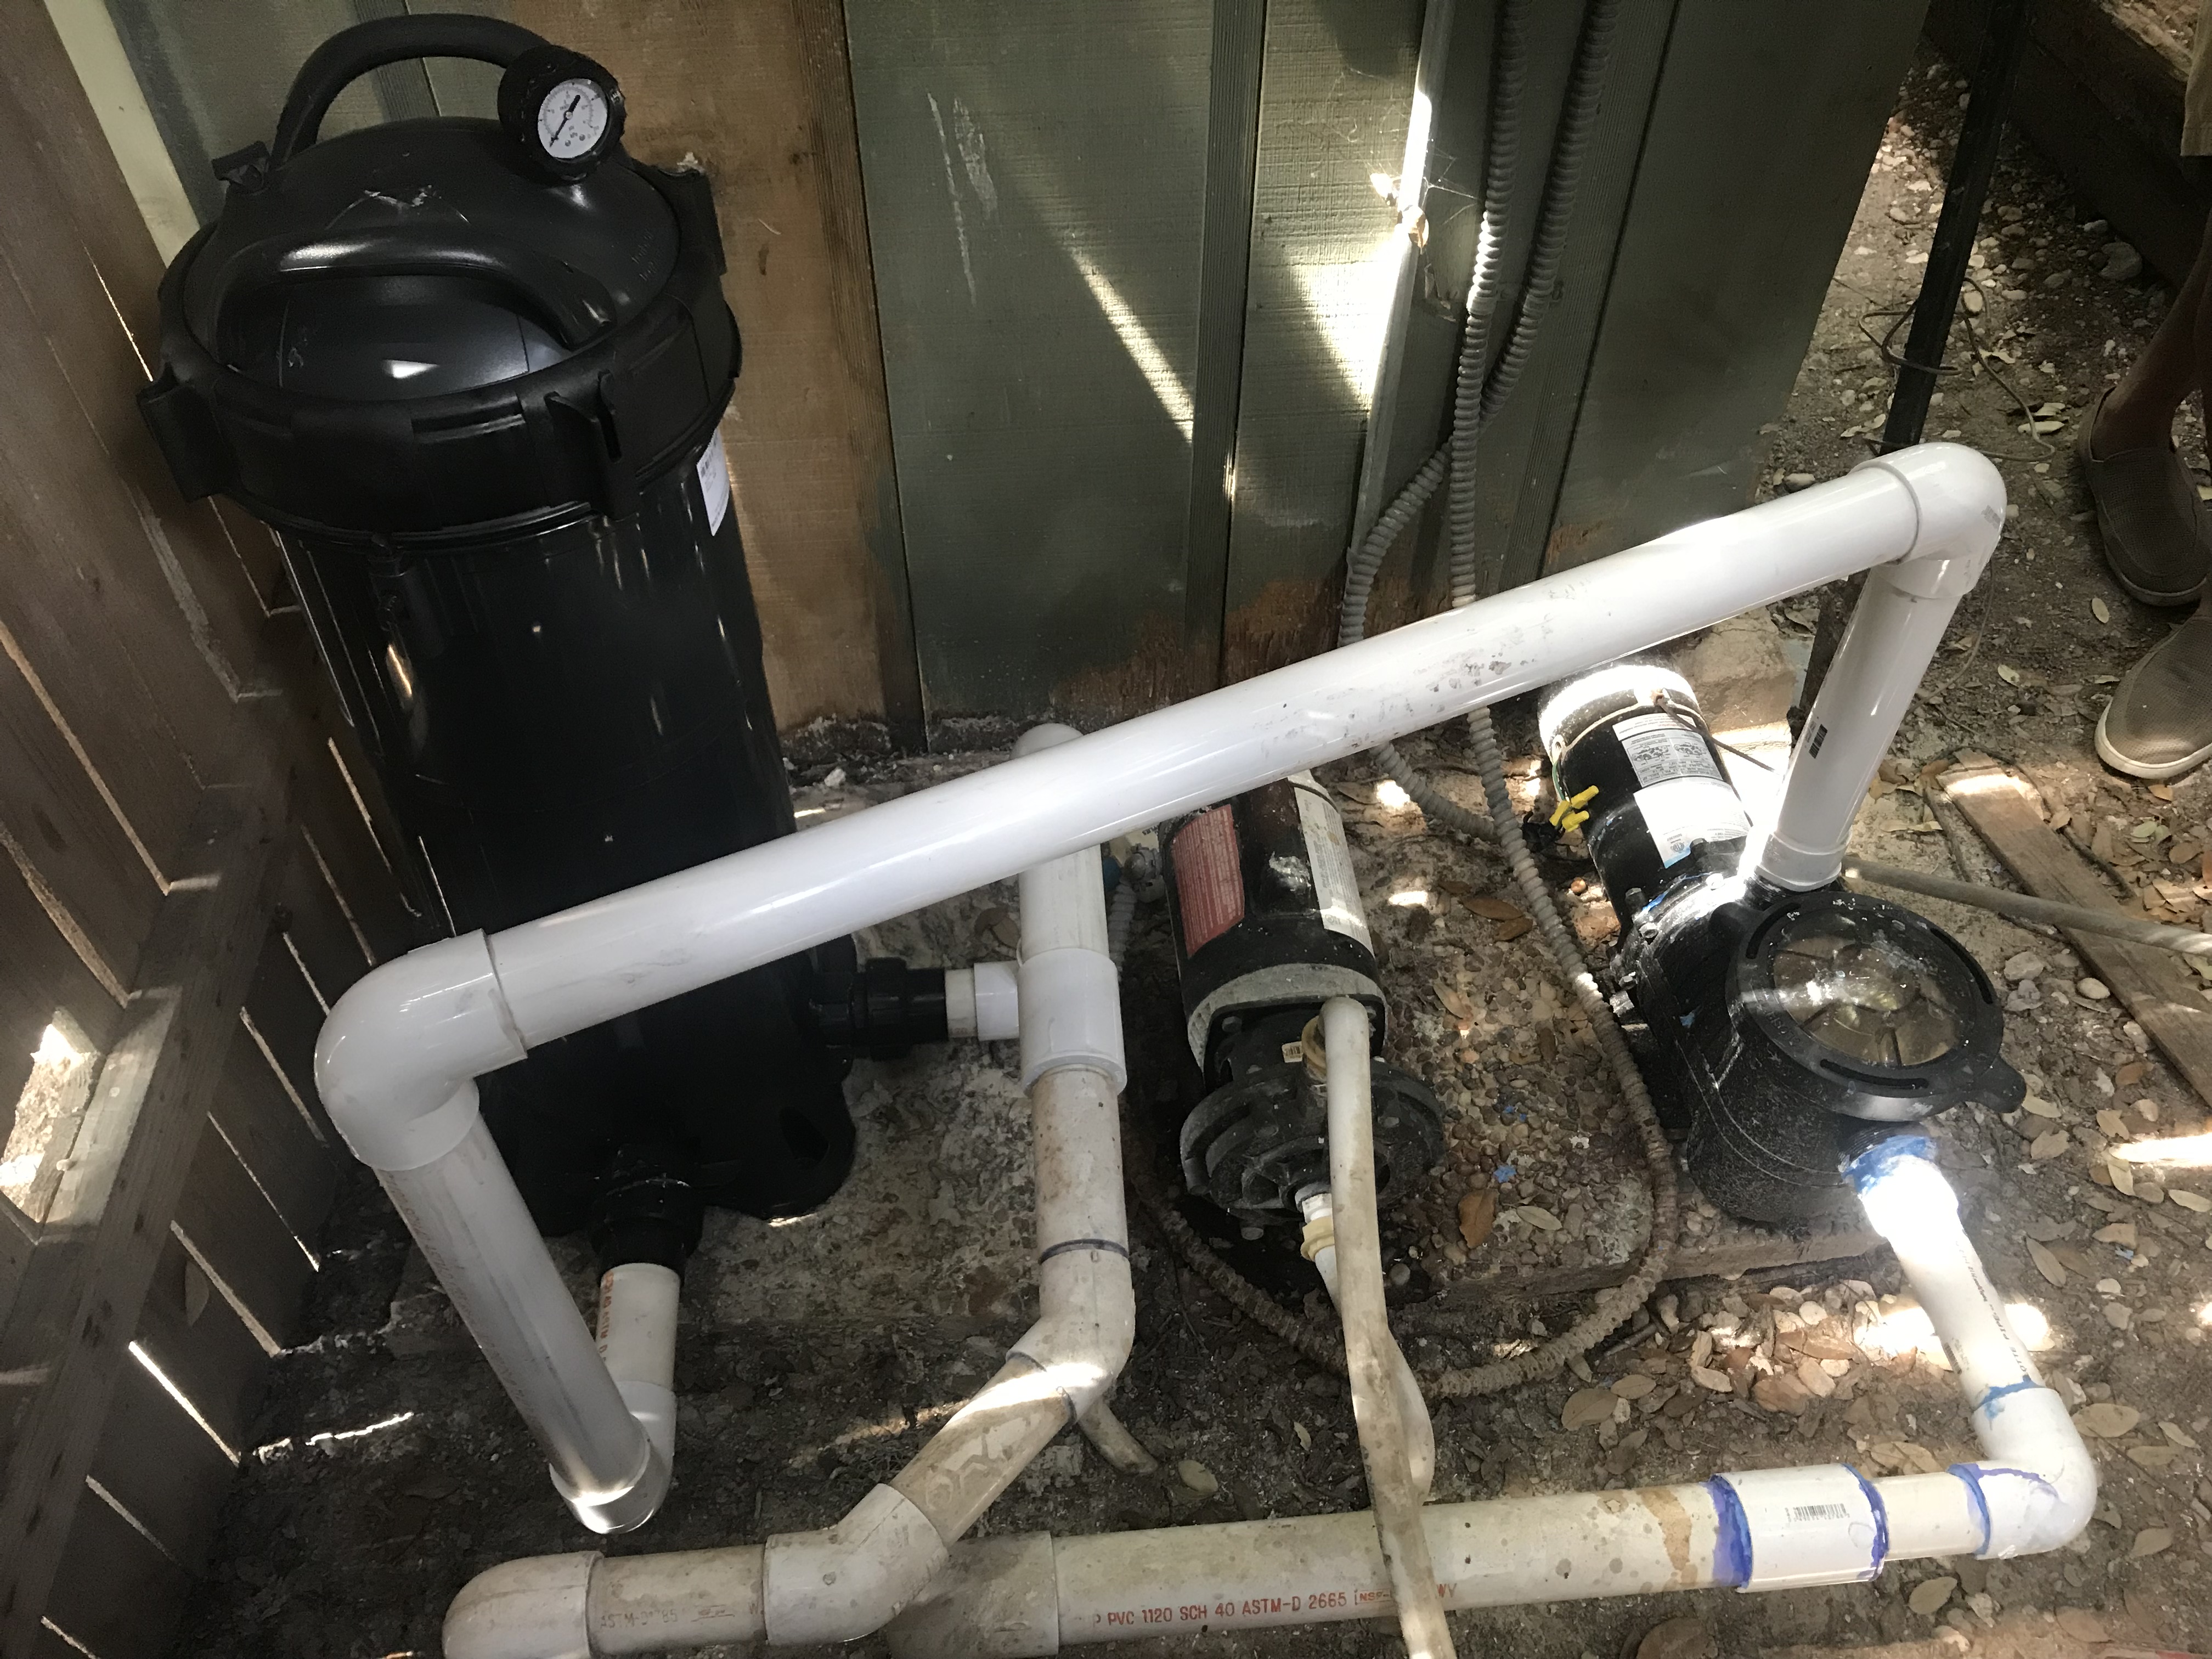 NEW PUMP BY CODY POOLS CONTACTOR BRANDON AND NEW FILTER BY CONTARCTOR LESLIES POOOLS PHOTO JULY 27 2018